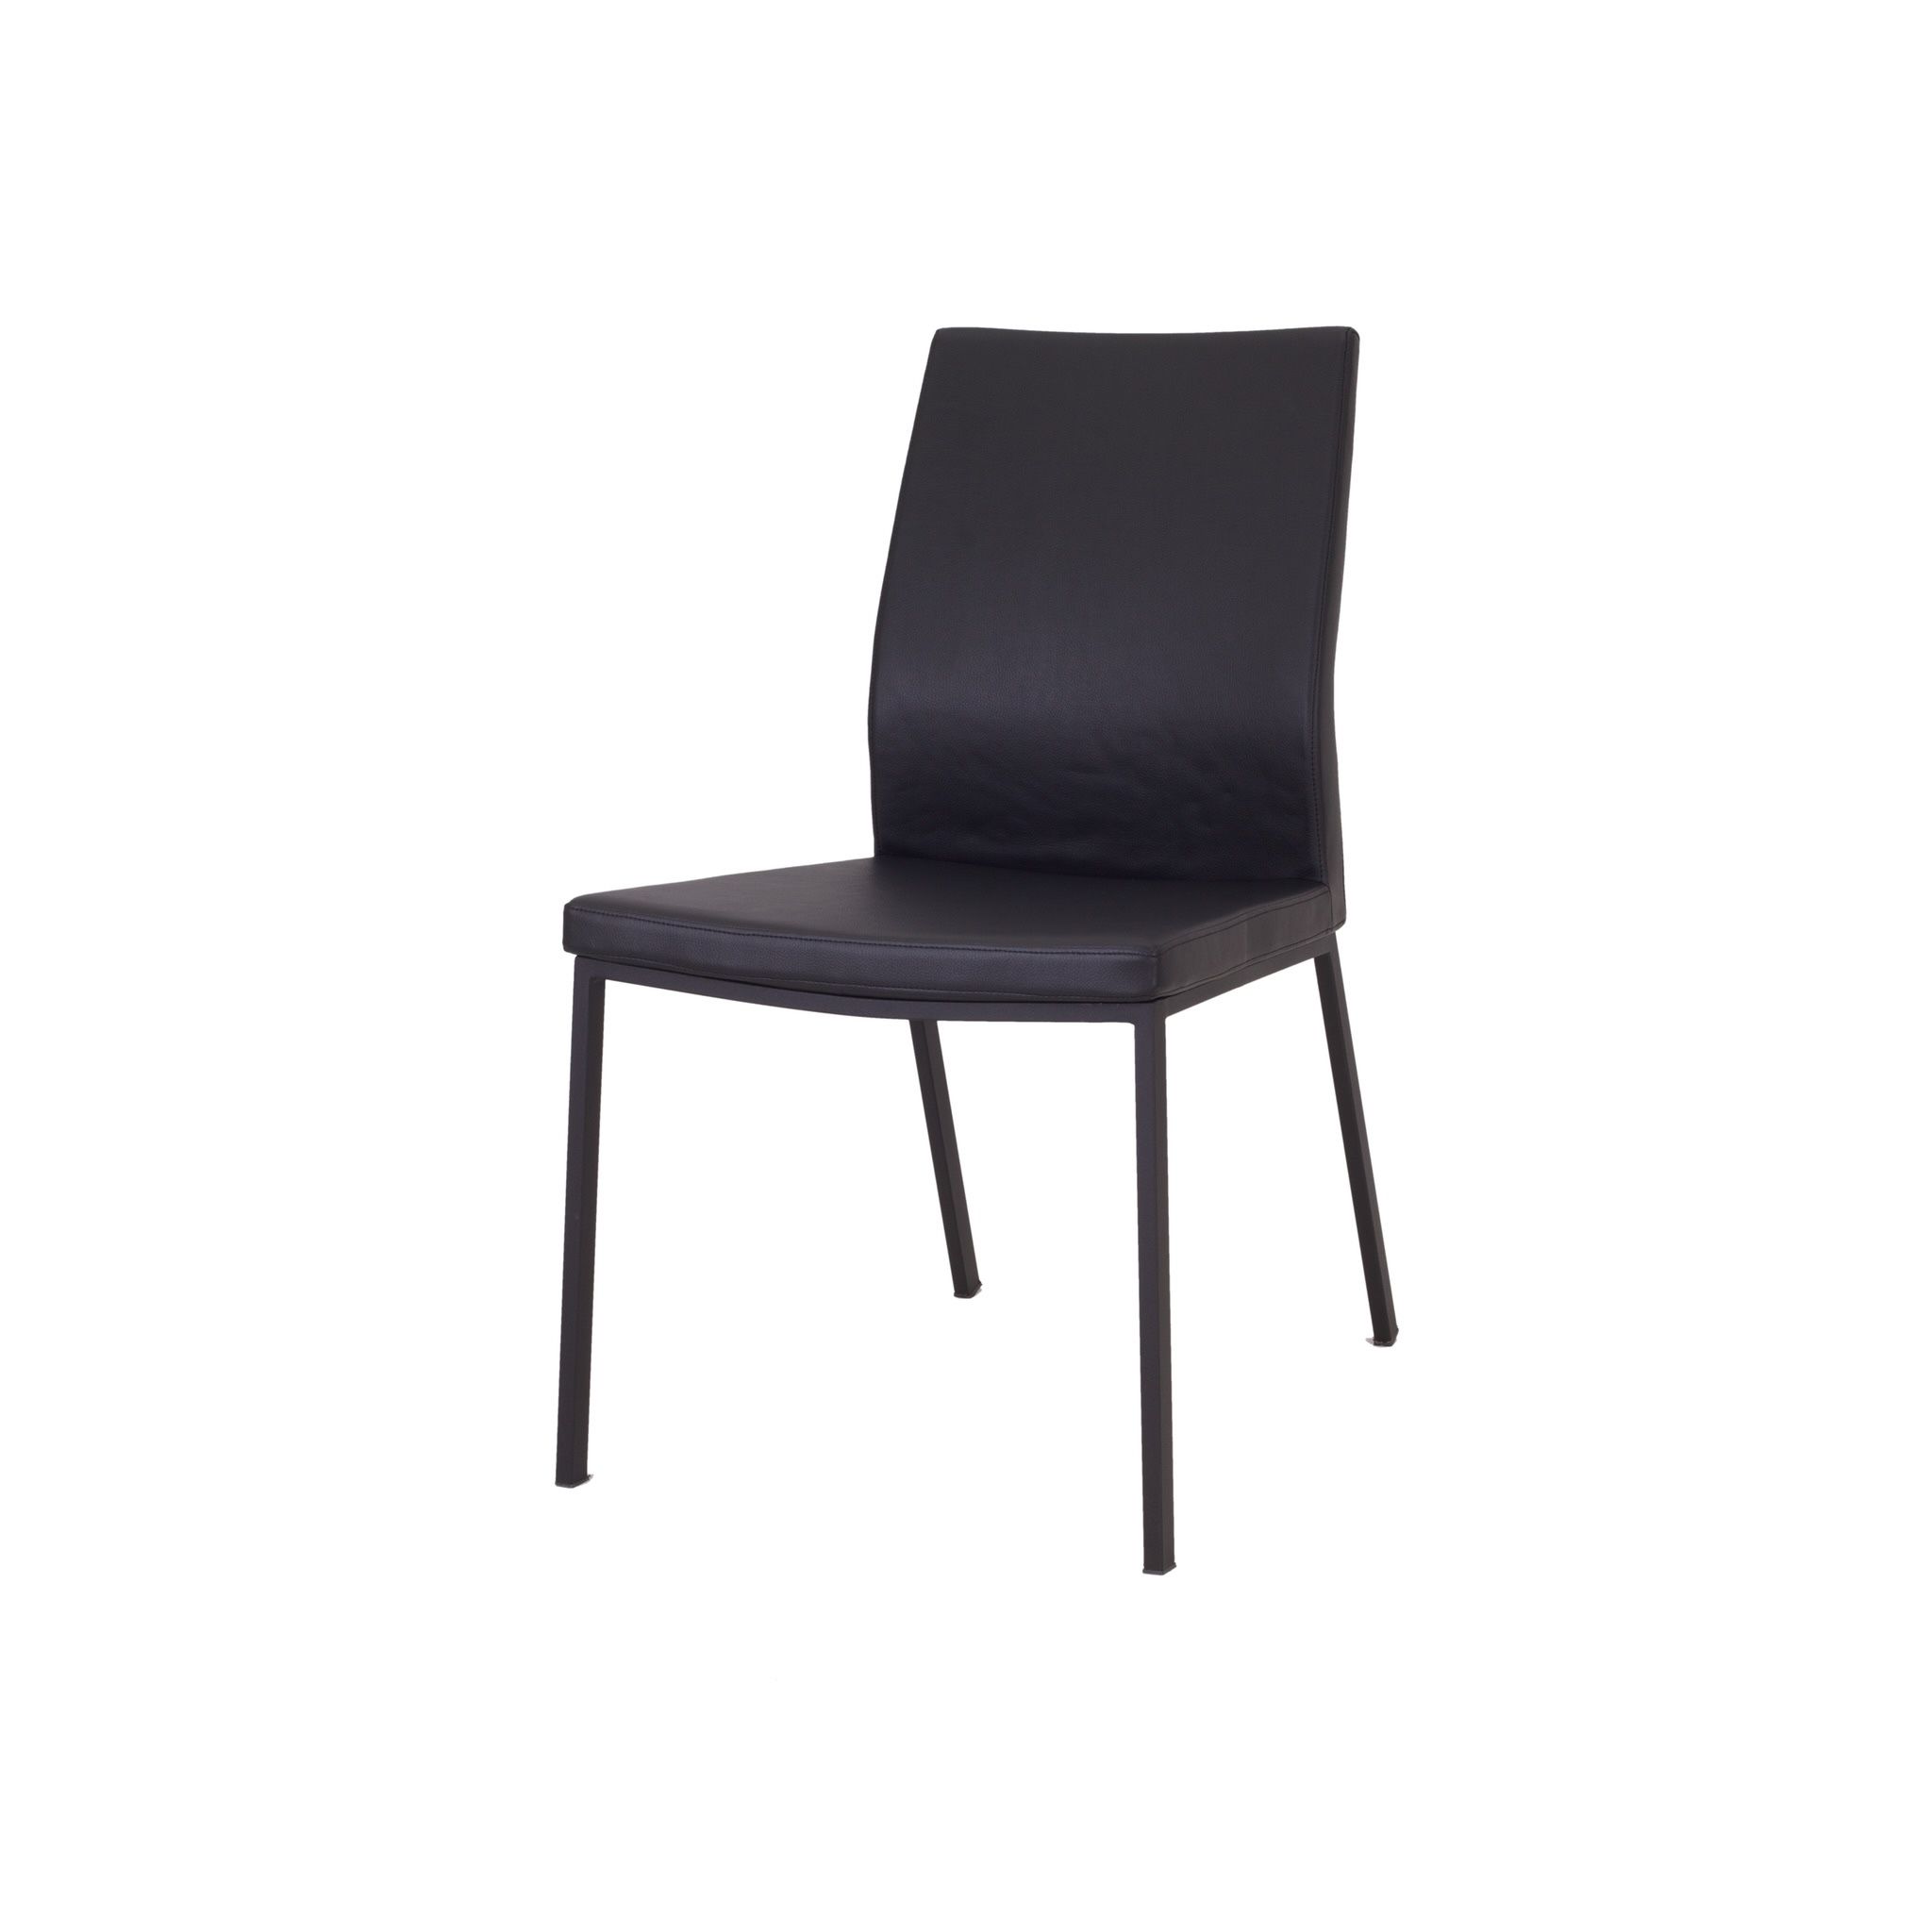 Set Of 4 - Brand New Chairs 